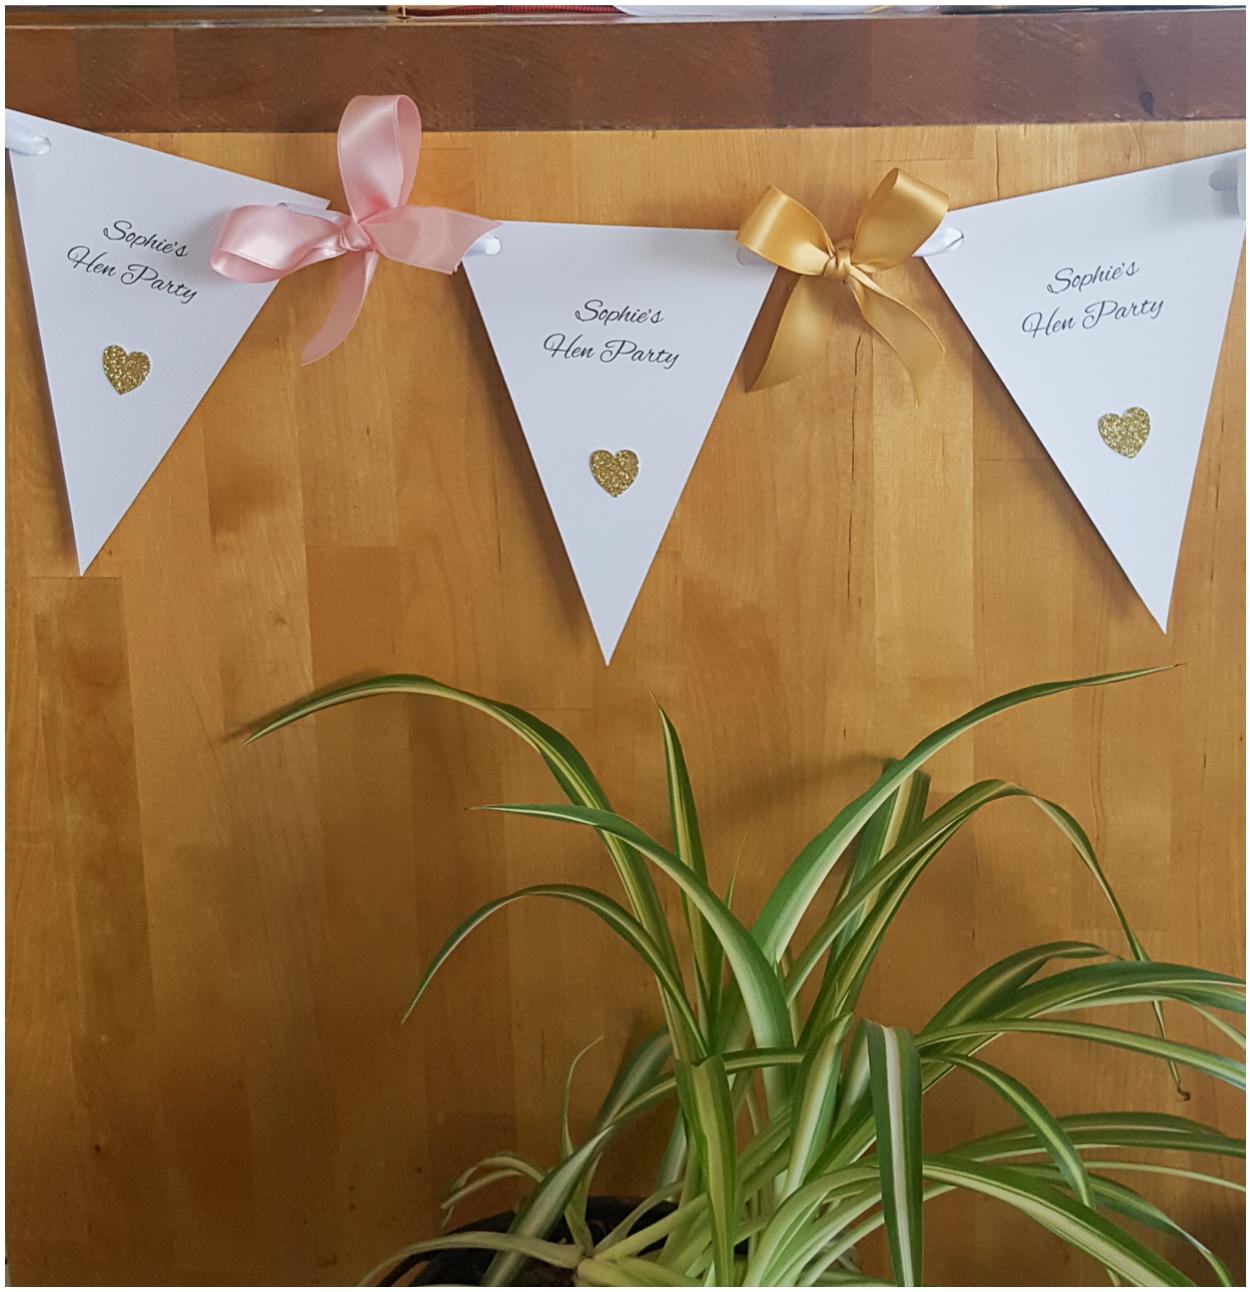 Personalised bunting and garland